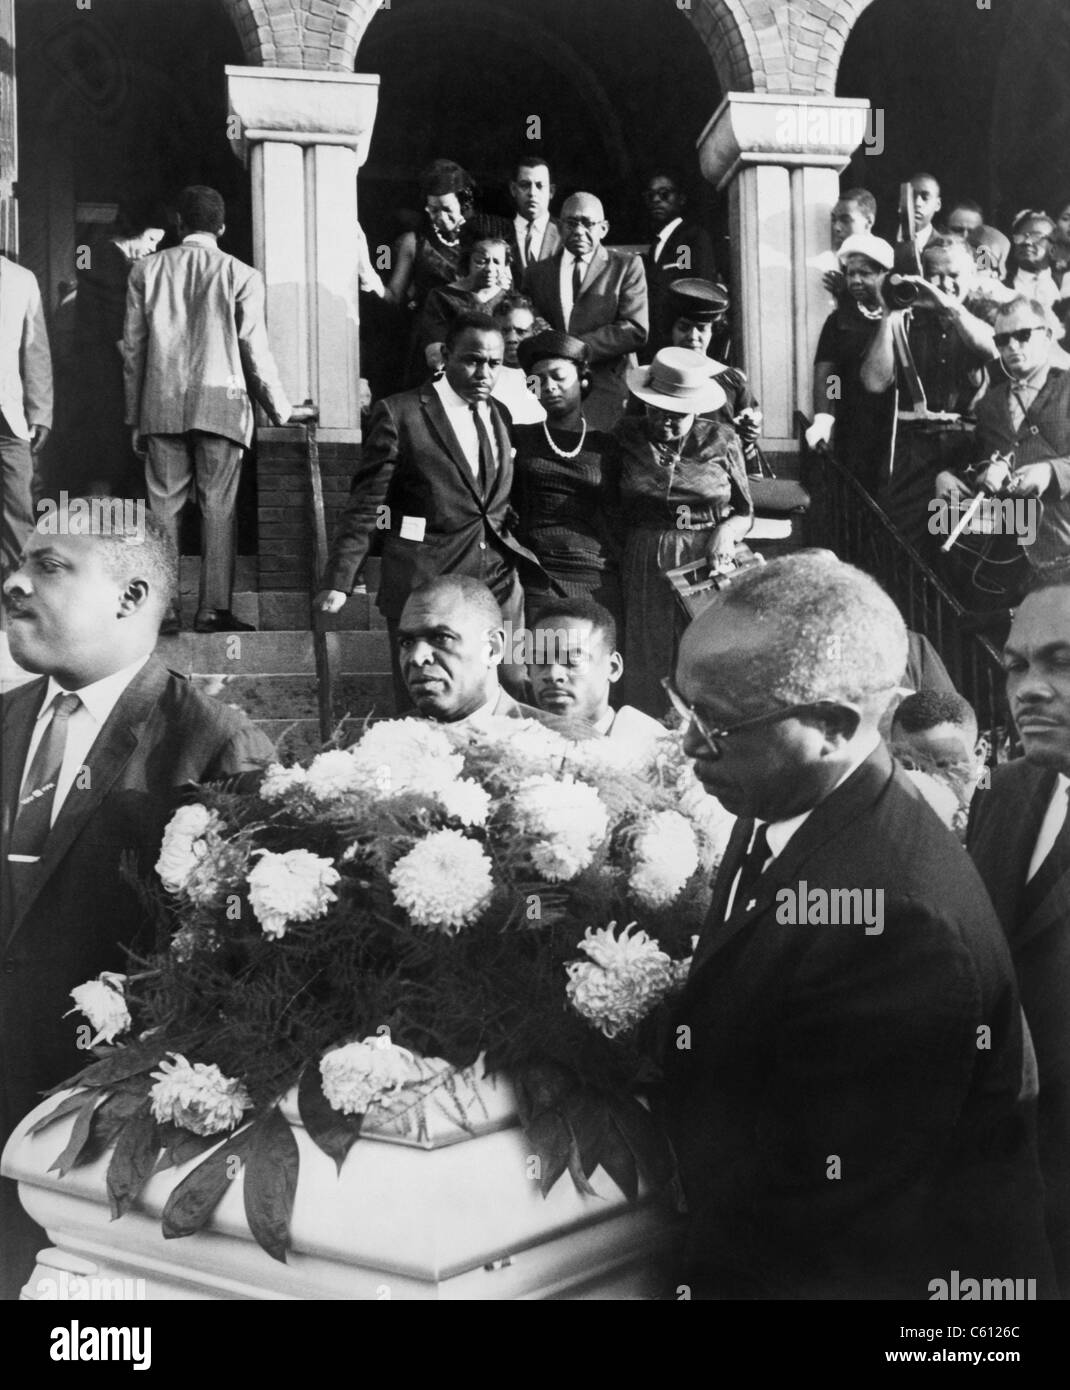 Mourning family of one of the four African American girls killed in the 16th Street Baptist Church bombing on September 15, 1963. Ku Klux Klan members were responsible for the bombing. Stock Photo